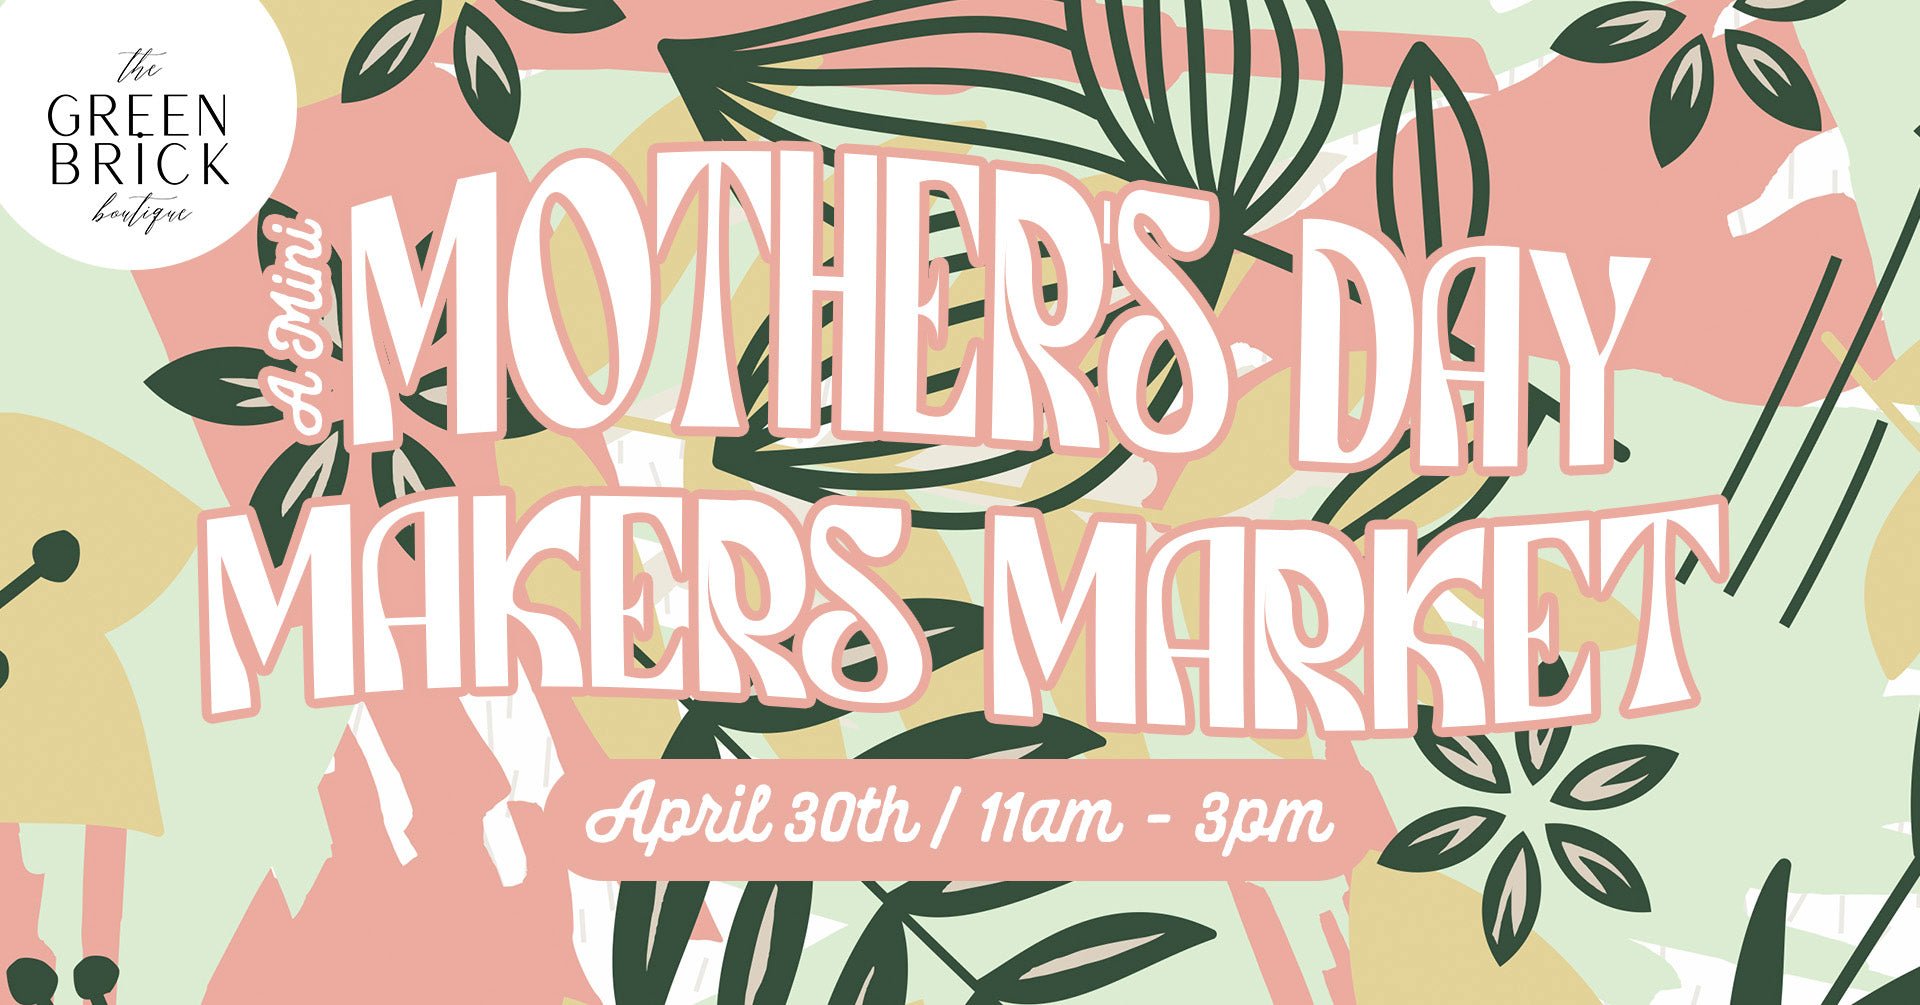 Mini Mother's Day Makers Market - The Green Brick Boutique